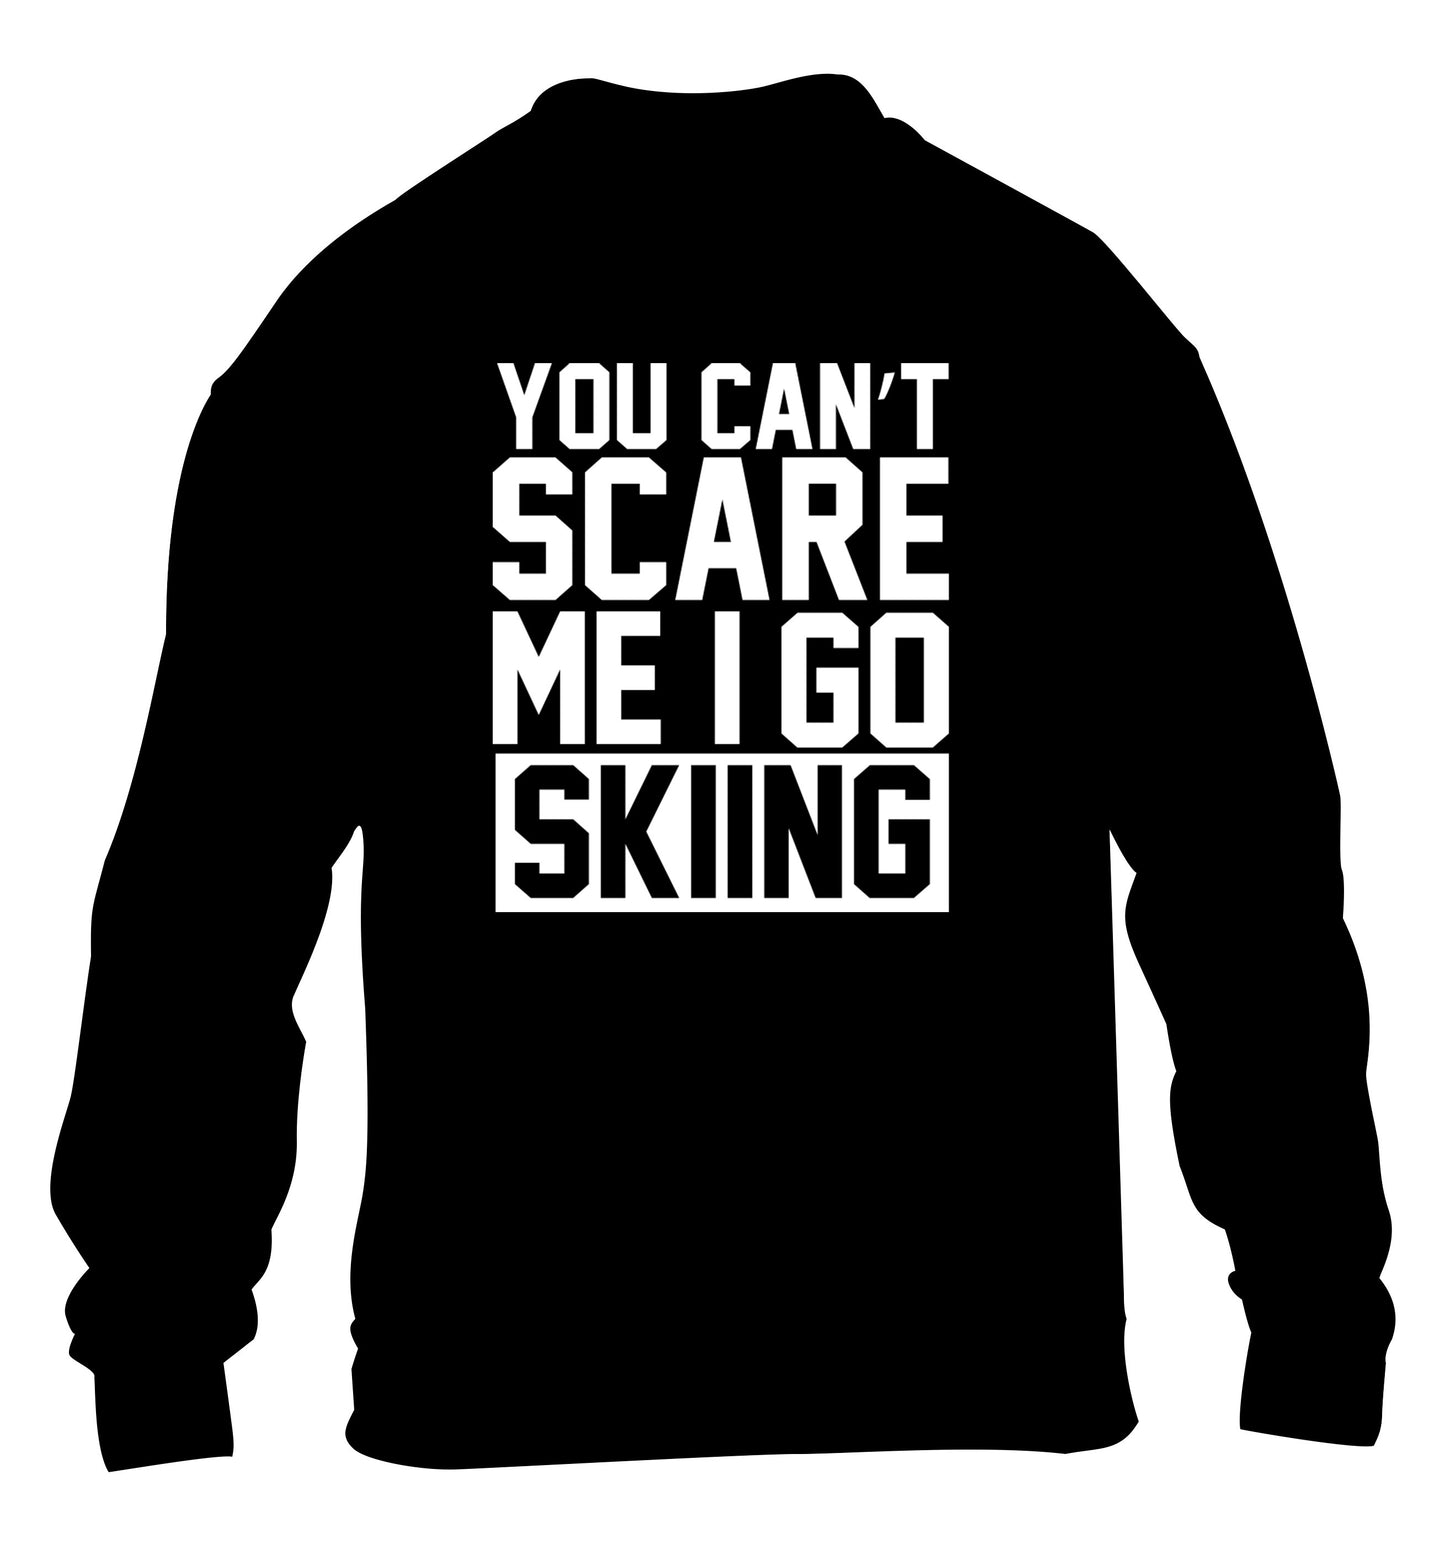 You can't scare me I go skiing children's black sweater 12-14 Years